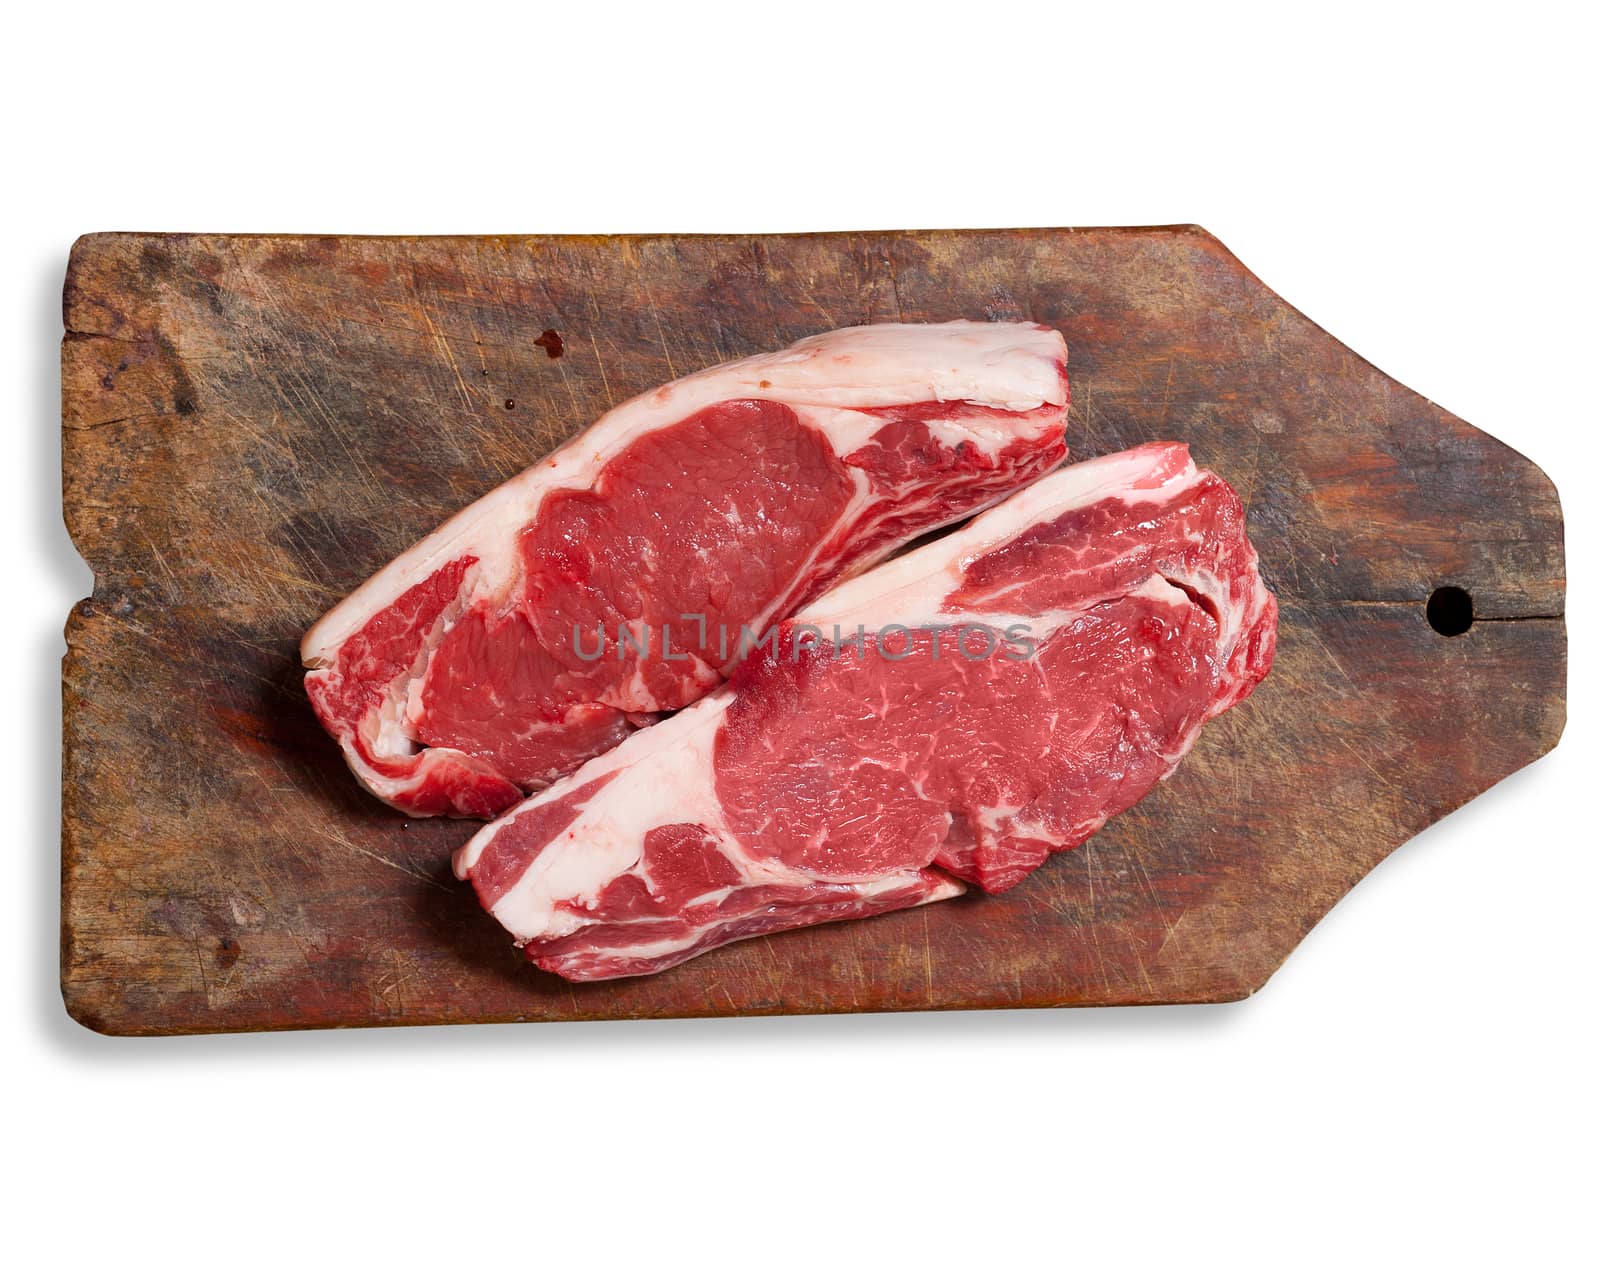 Argentinean "bife de chorizo" raw meat on wooden table. Clipping path excludes shadow.